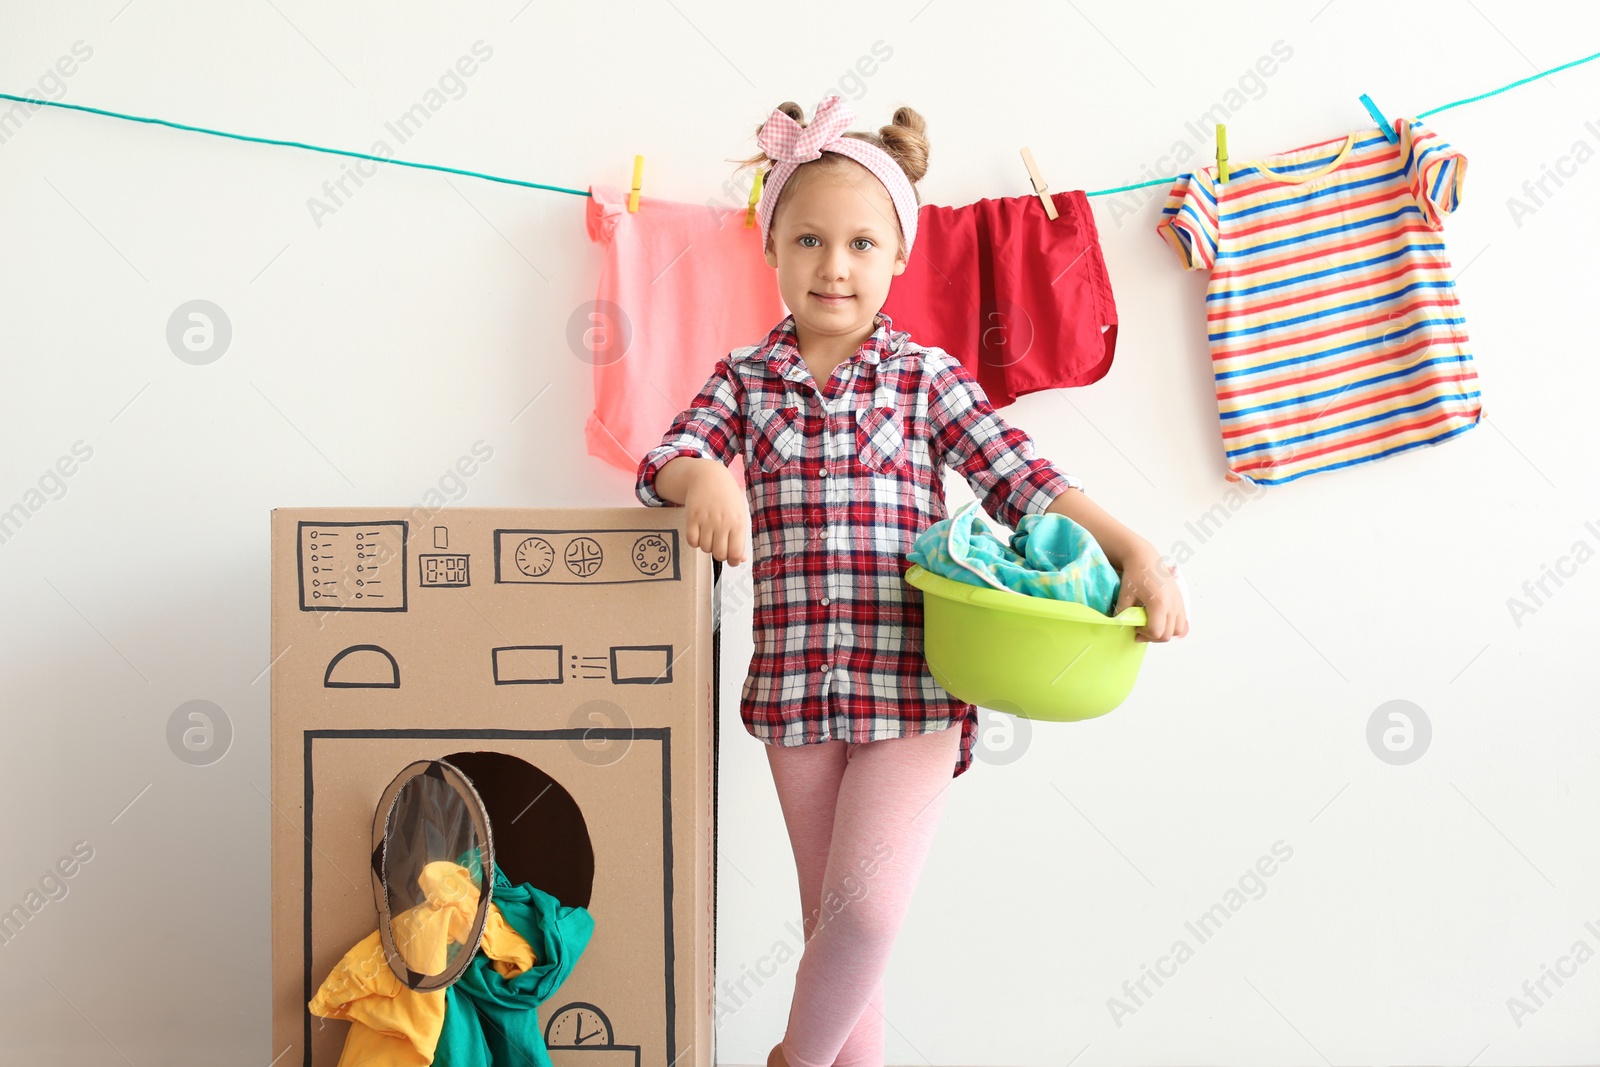 Photo of Adorable little child playing with cardboard washing machine and clothes indoors